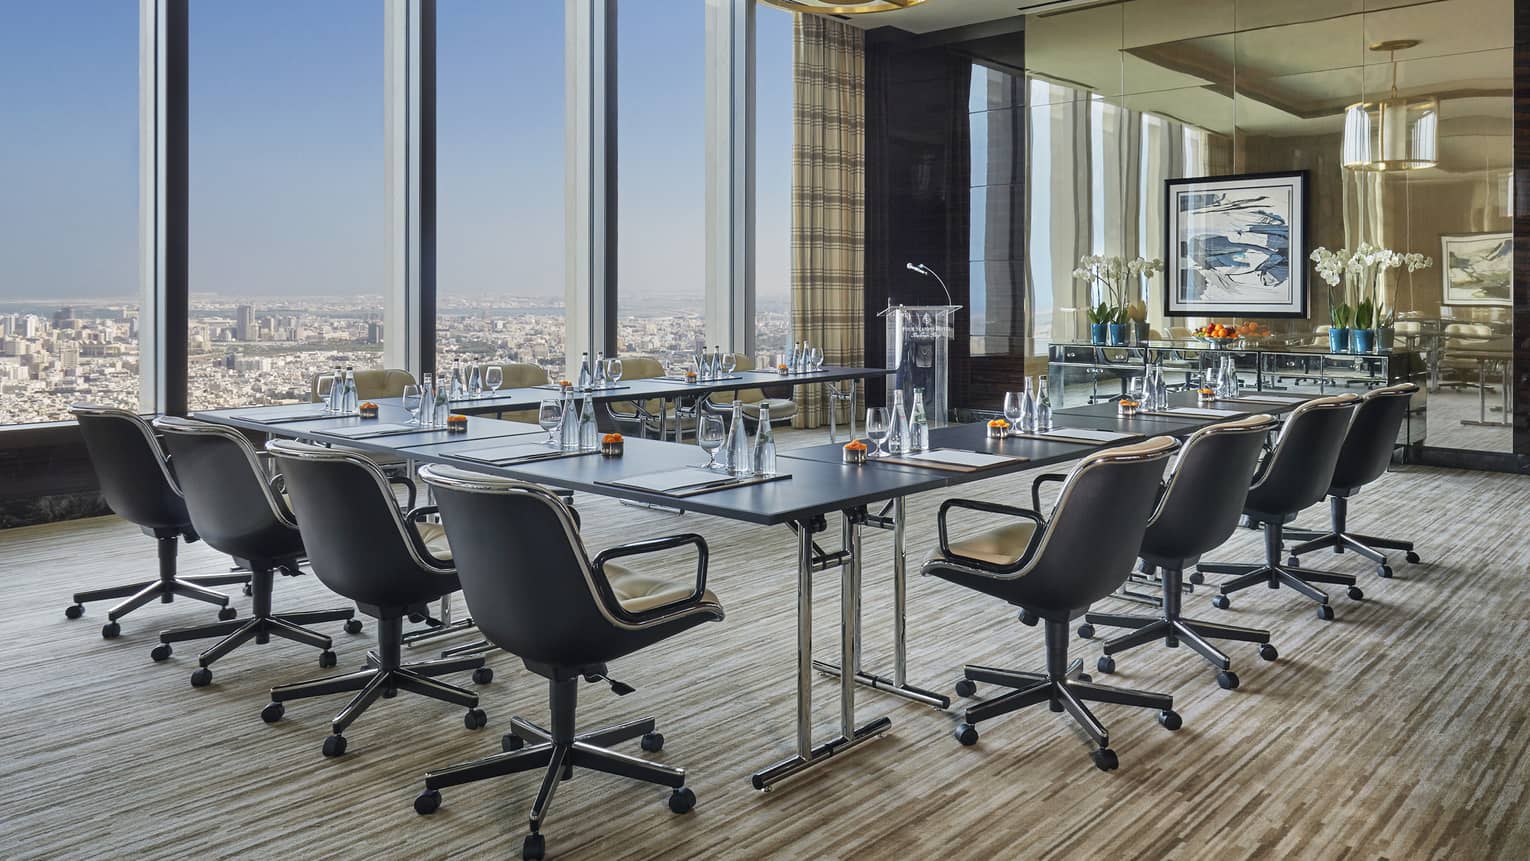 Meeting room with glass modular table lined with swivel chairs, floor-to-ceiling glass windows